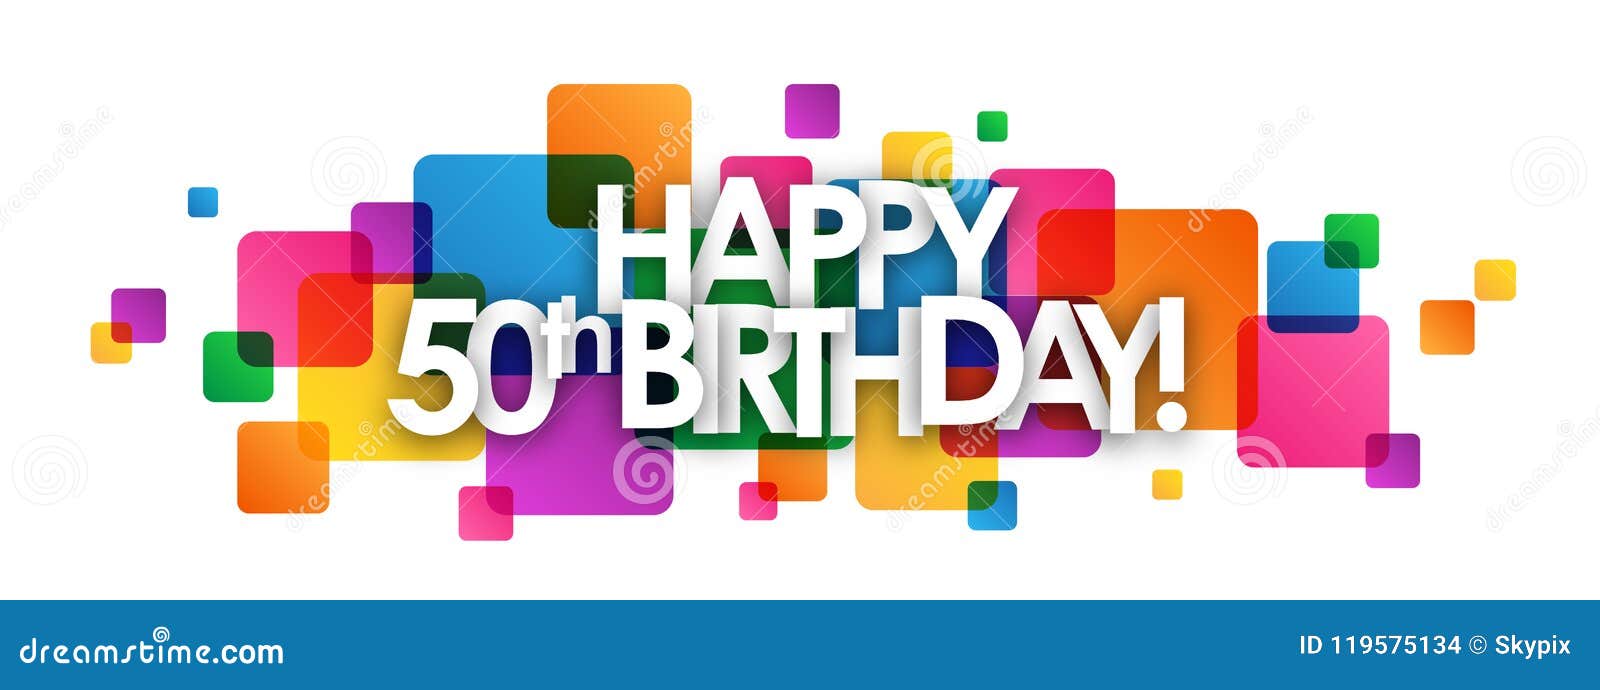 happy 50th birthday! colorful overlapping squares banner